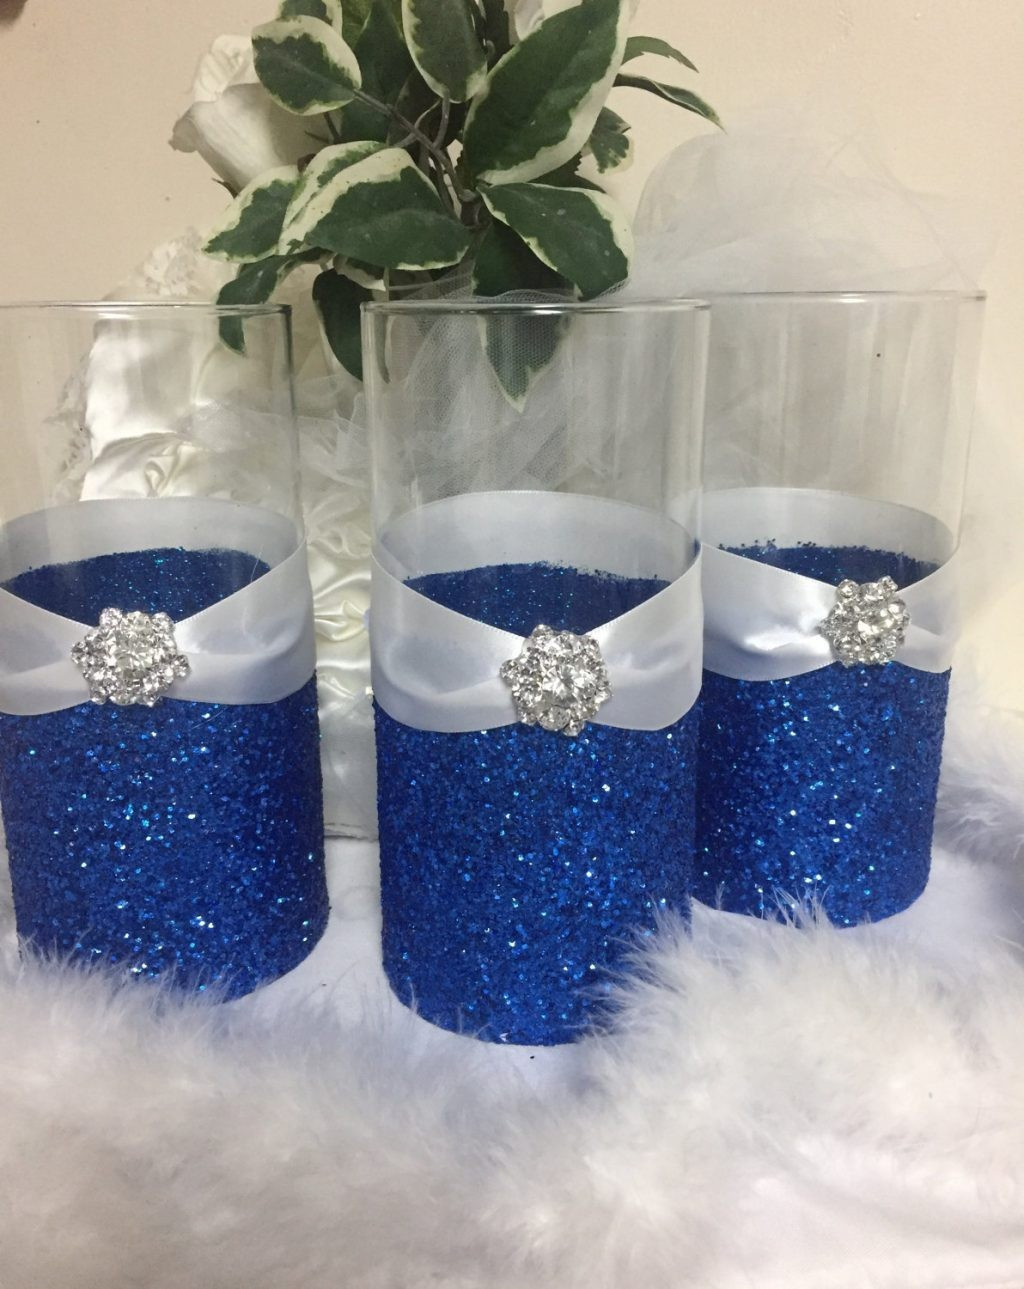 22 Awesome Decorative Modern Vases 2024 free download decorative modern vases of wedding decorations centerpieces beautiful tallh vases glitter vase throughout wedding decorations centerpieces beautiful tallh vases glitter vase centerpiece diy 